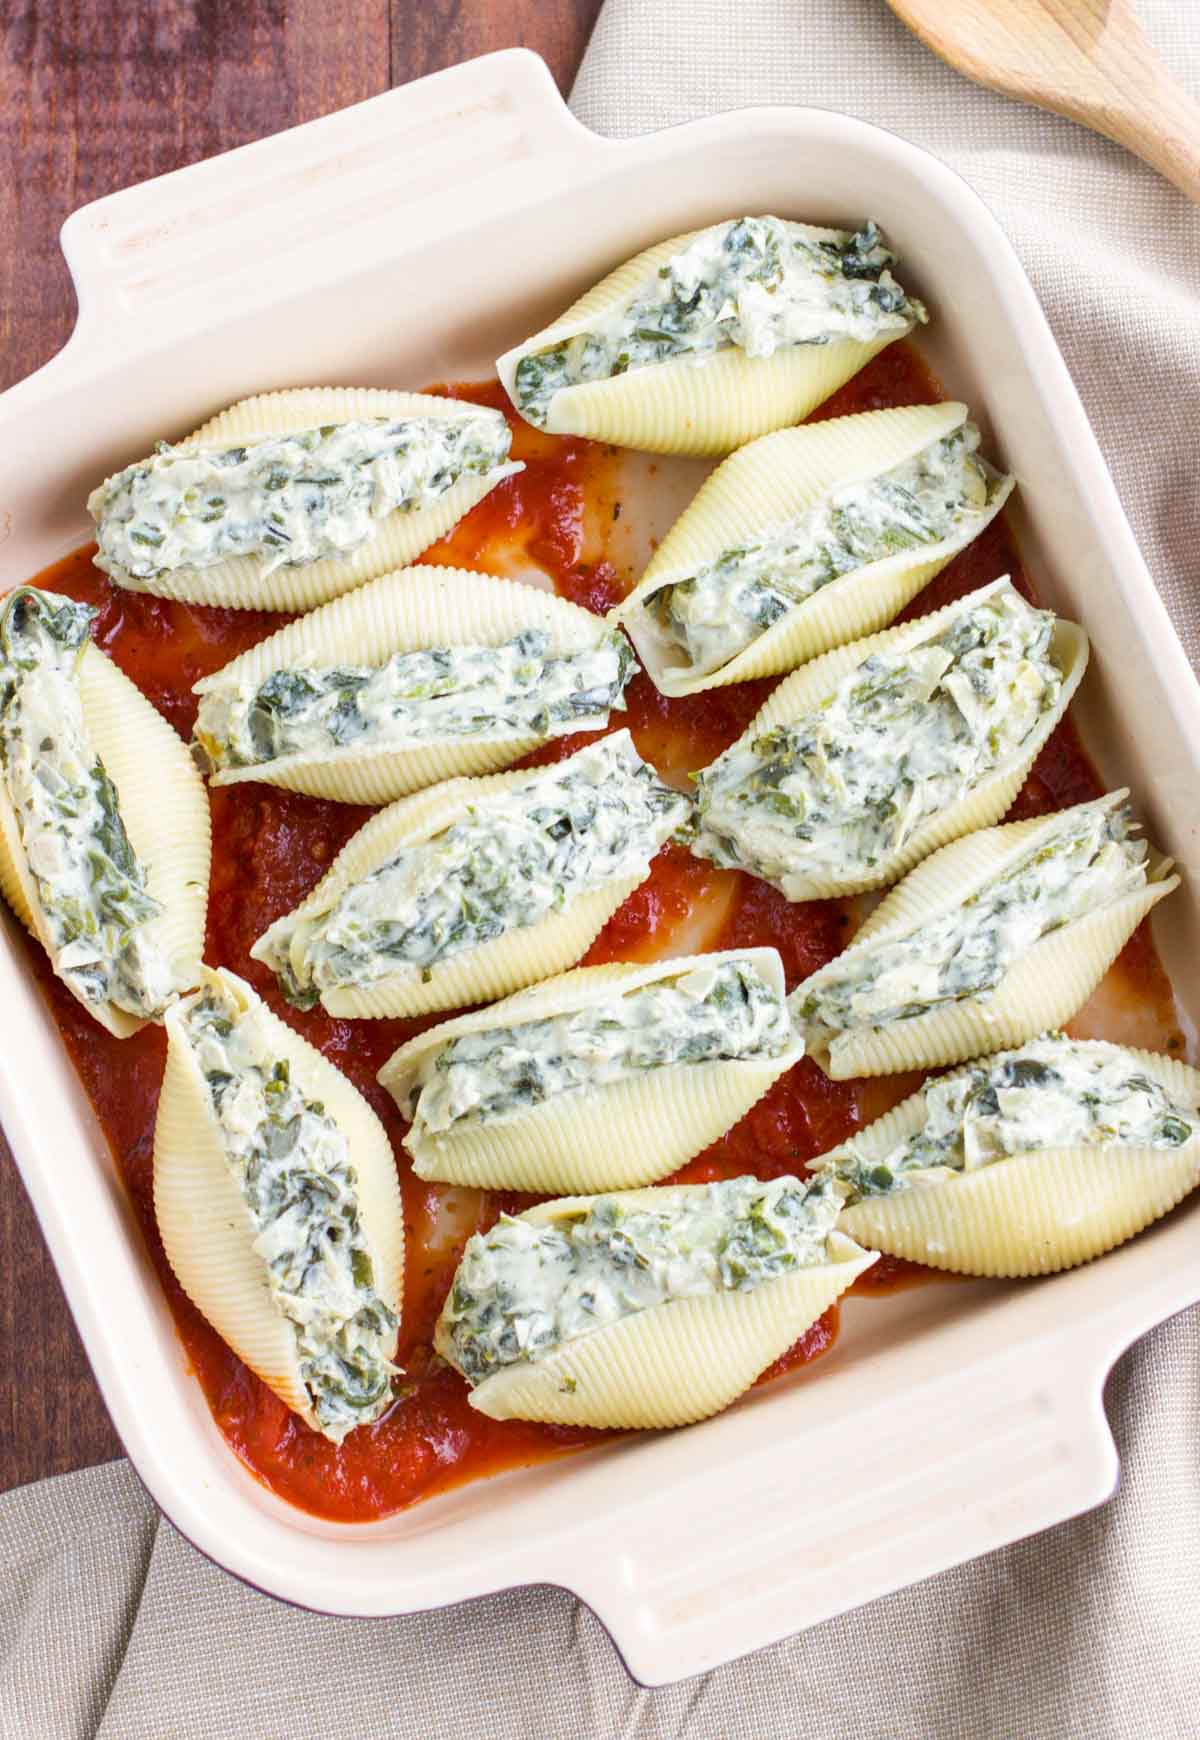 Overhead shot of a casserole dish filled with stuffed shells without sauce on a rustic background.